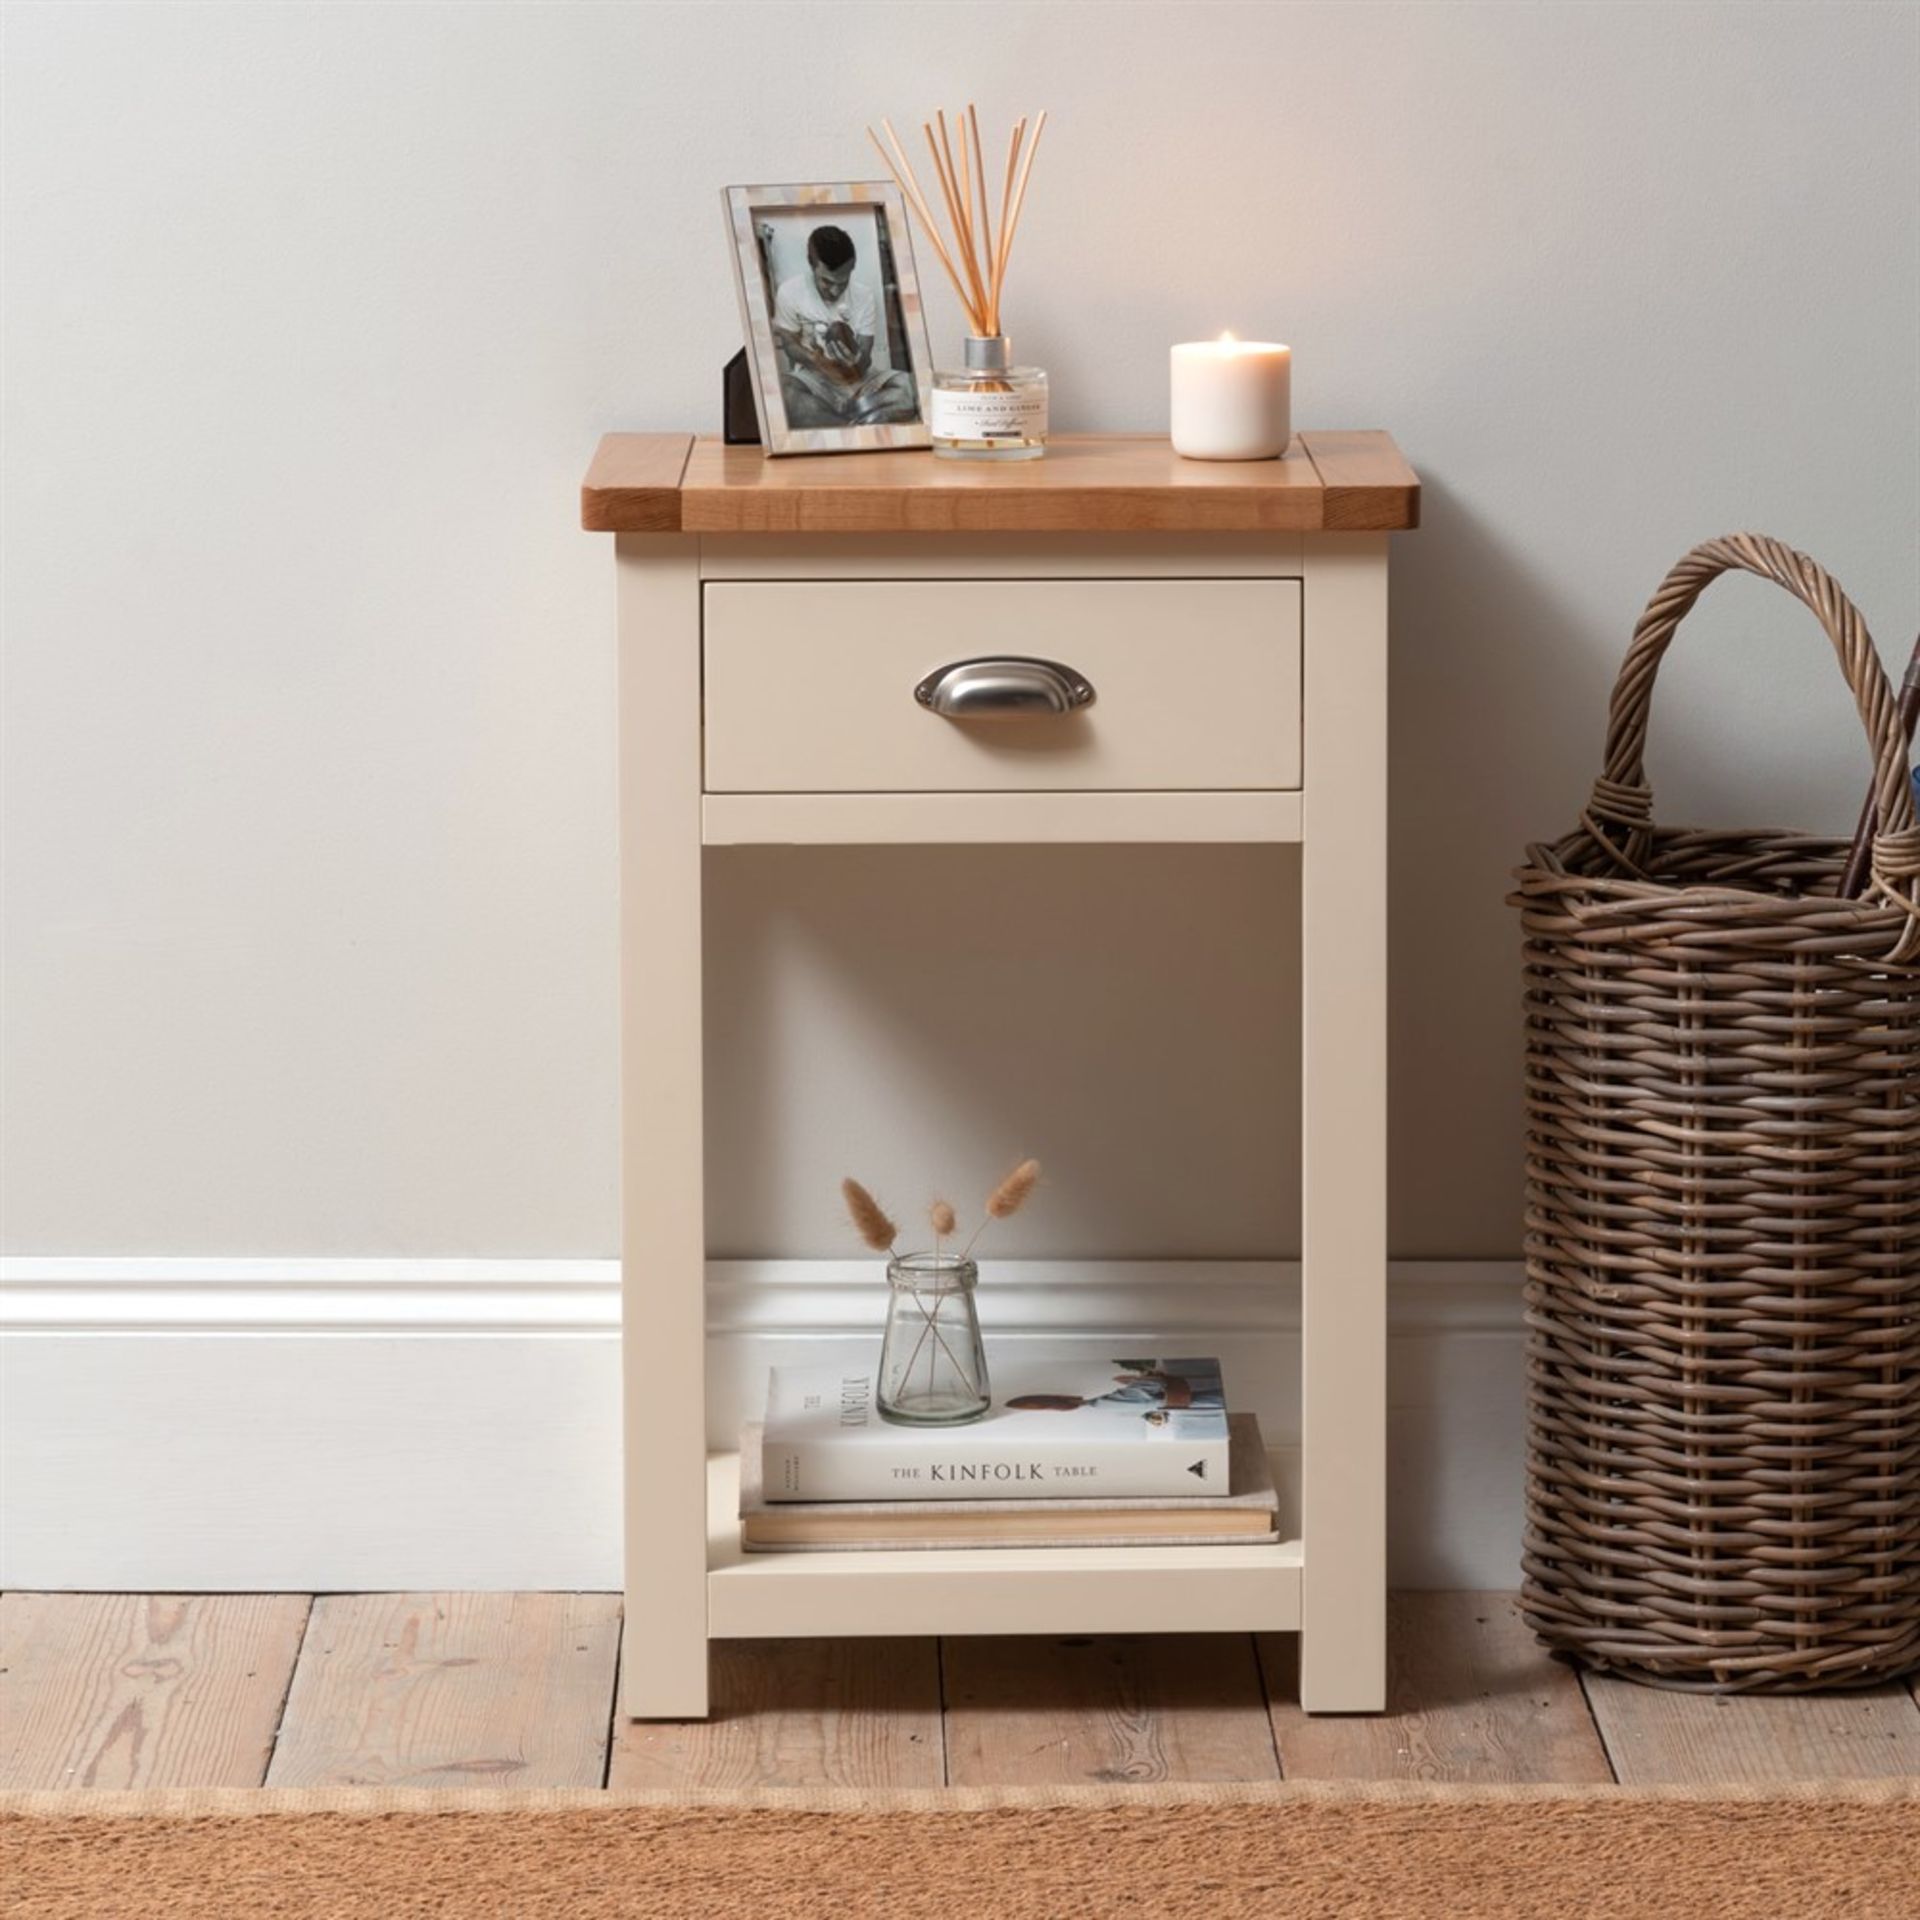 Cotswold Company Sussex Cotswold Cream 1 Drawer Bedside Table RRP Â£155.00 - This item looks to be